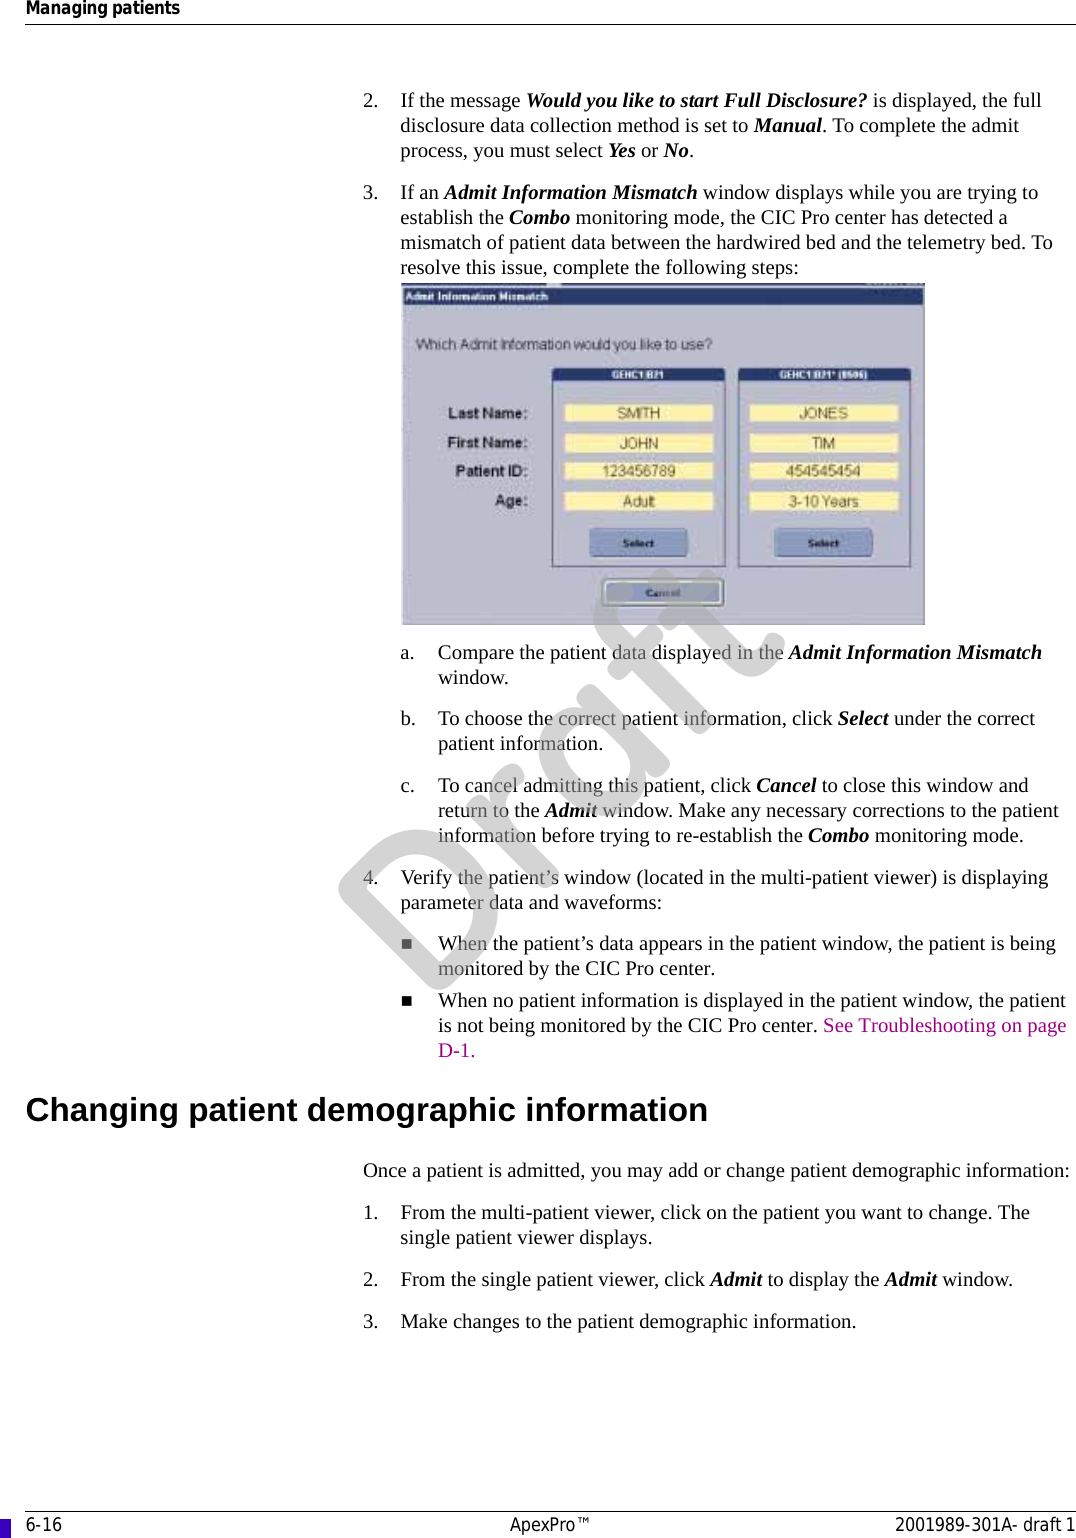 6-16 ApexPro™ 2001989-301A- draft 1Managing patients2. If the message Would you like to start Full Disclosure? is displayed, the full disclosure data collection method is set to Manual. To complete the admit process, you must select Yes or No.3. If an Admit Information Mismatch window displays while you are trying to establish the Combo monitoring mode, the CIC Pro center has detected a mismatch of patient data between the hardwired bed and the telemetry bed. To resolve this issue, complete the following steps:a. Compare the patient data displayed in the Admit Information Mismatch window.b. To choose the correct patient information, click Select under the correct patient information.c. To cancel admitting this patient, click Cancel to close this window and return to the Admit window. Make any necessary corrections to the patient information before trying to re-establish the Combo monitoring mode.4. Verify the patient’s window (located in the multi-patient viewer) is displaying parameter data and waveforms:When the patient’s data appears in the patient window, the patient is being monitored by the CIC Pro center.When no patient information is displayed in the patient window, the patient is not being monitored by the CIC Pro center. See Troubleshooting on page D-1.Changing patient demographic informationOnce a patient is admitted, you may add or change patient demographic information:1. From the multi-patient viewer, click on the patient you want to change. The single patient viewer displays.2. From the single patient viewer, click Admit to display the Admit window.3. Make changes to the patient demographic information.Draft